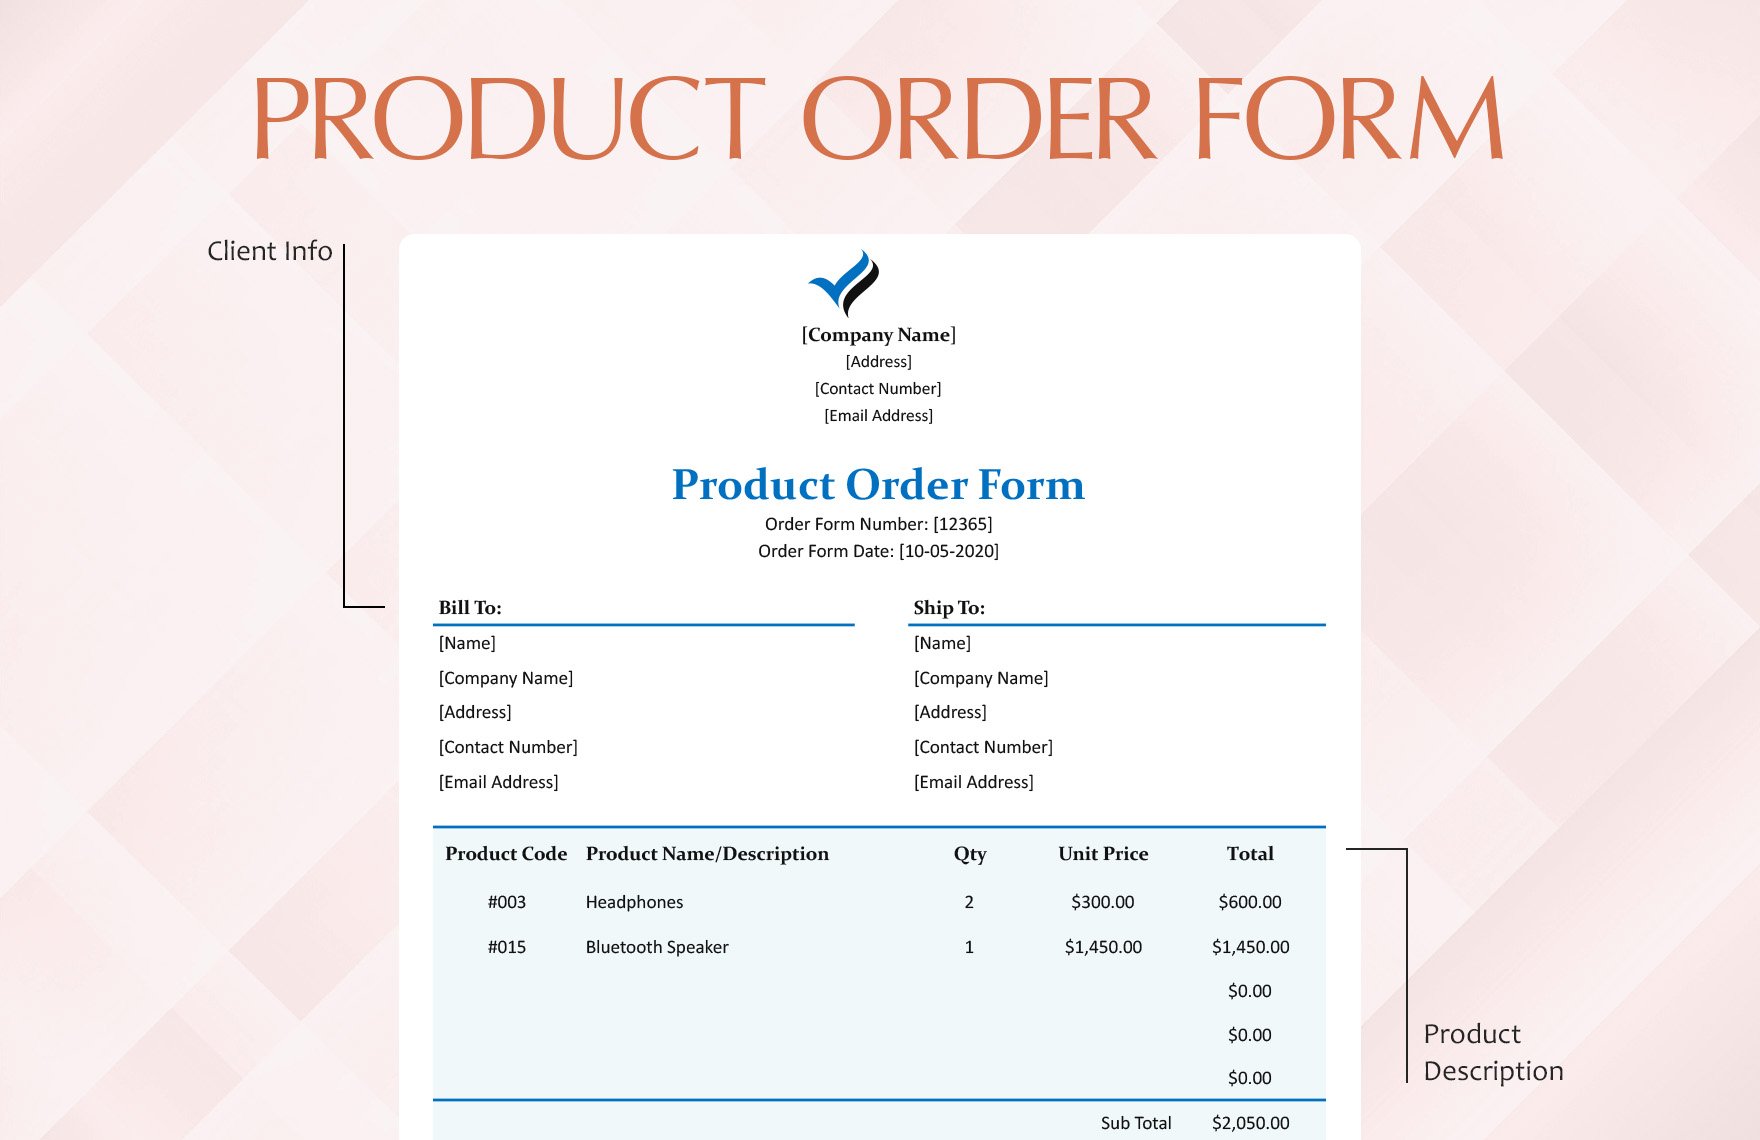 Product Order Form Template